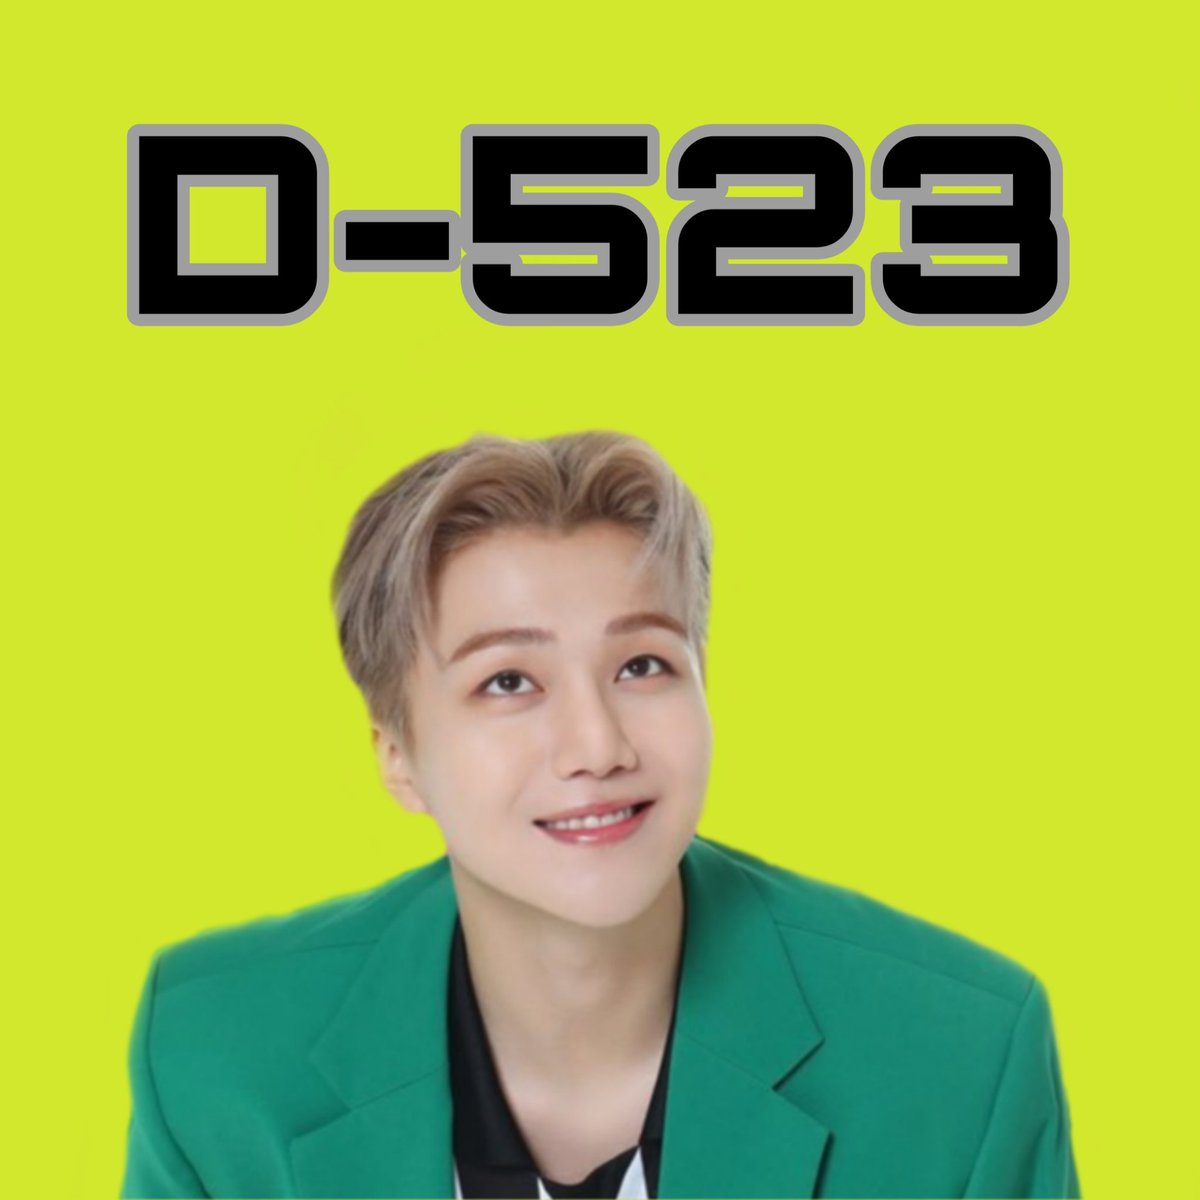 D-523- Hello Jinho, it's too hot here today. How's the weather there? Always drink water to hydrate yourself. Today too Fighting!!  #PENTAGON  #Jinho  #펜타곤  #진호  @CUBE_PTG